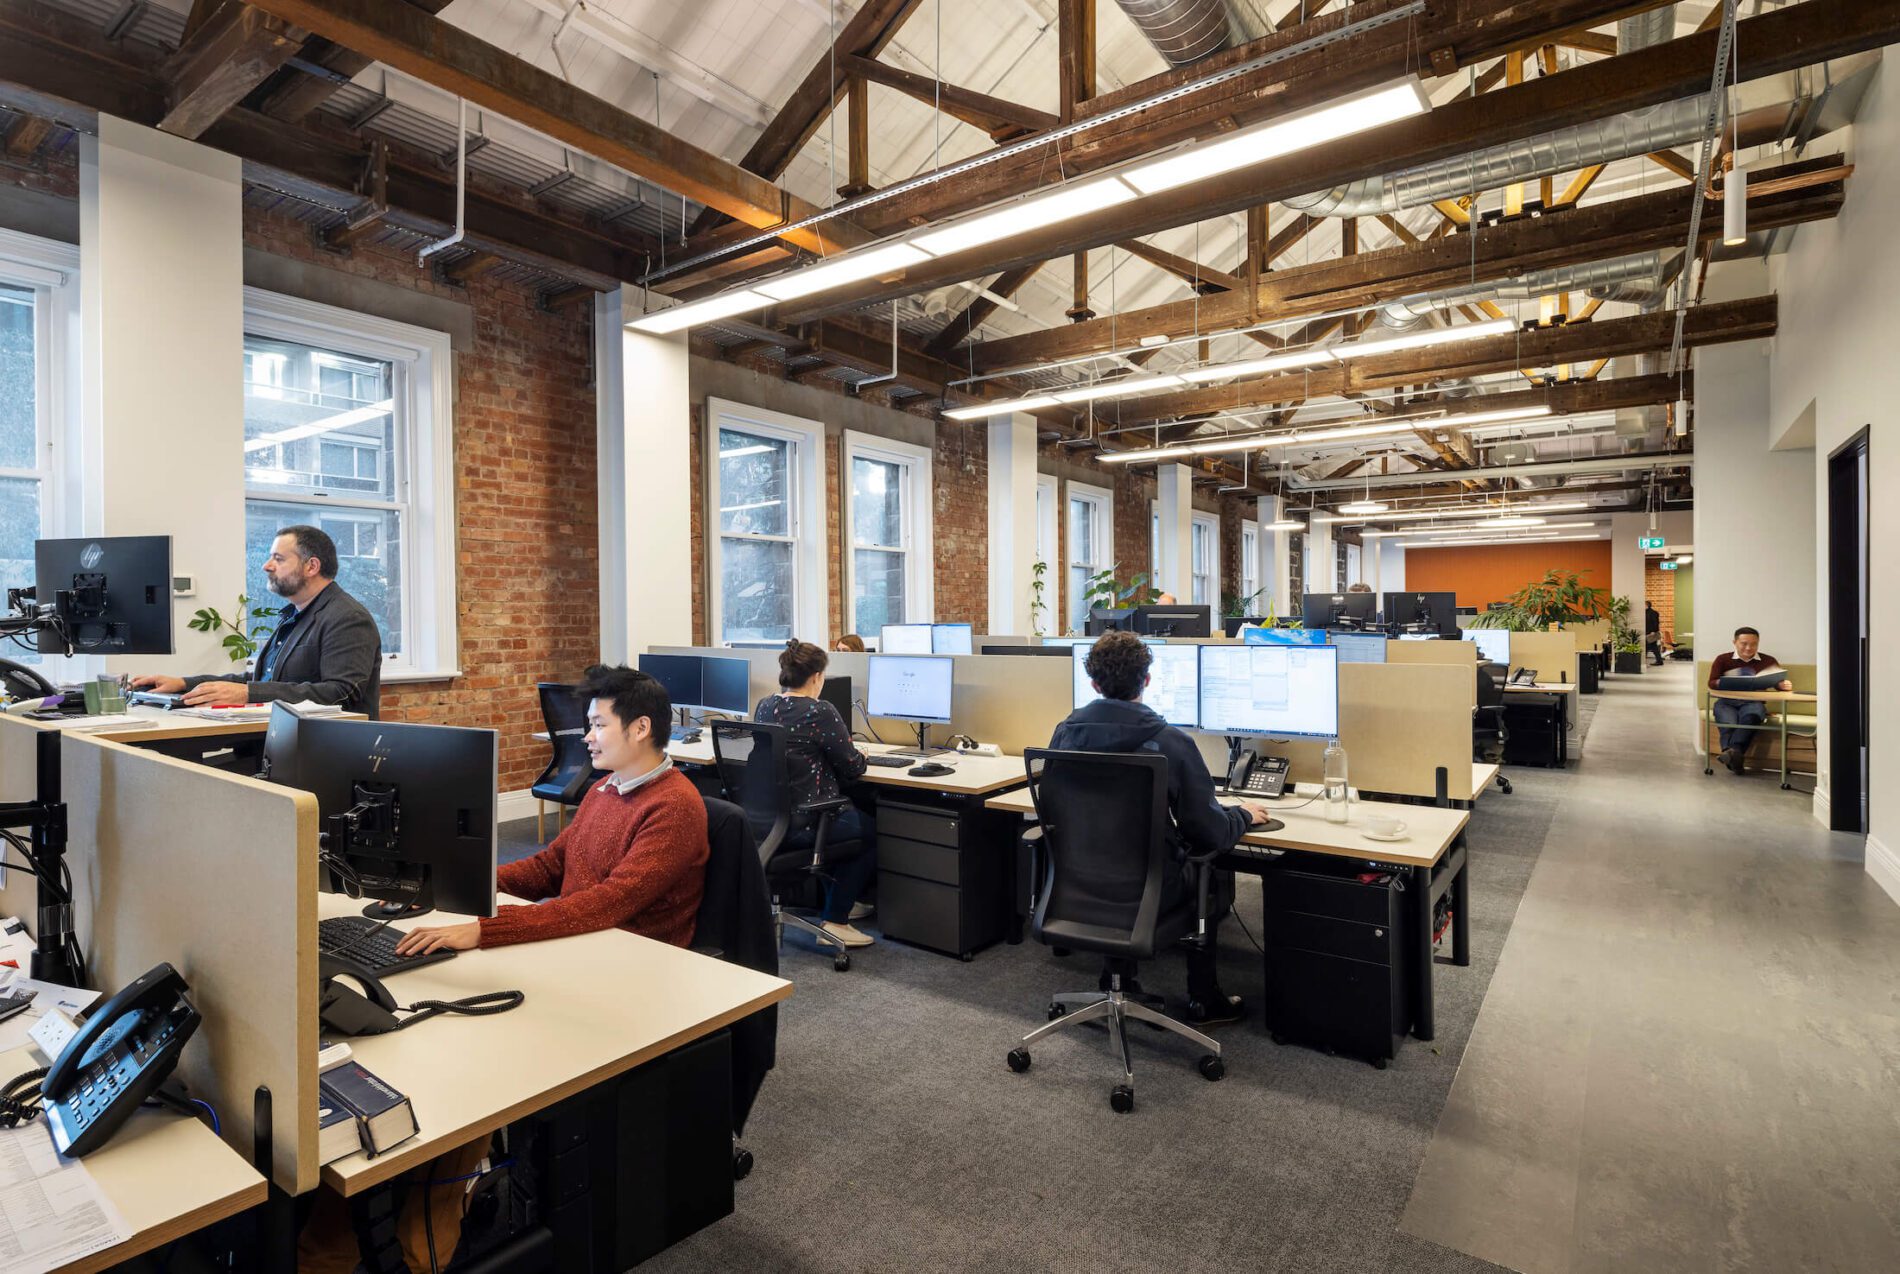 Staff sit and stand at desks within Foreground office, exposed timber beams in warehouse style space.